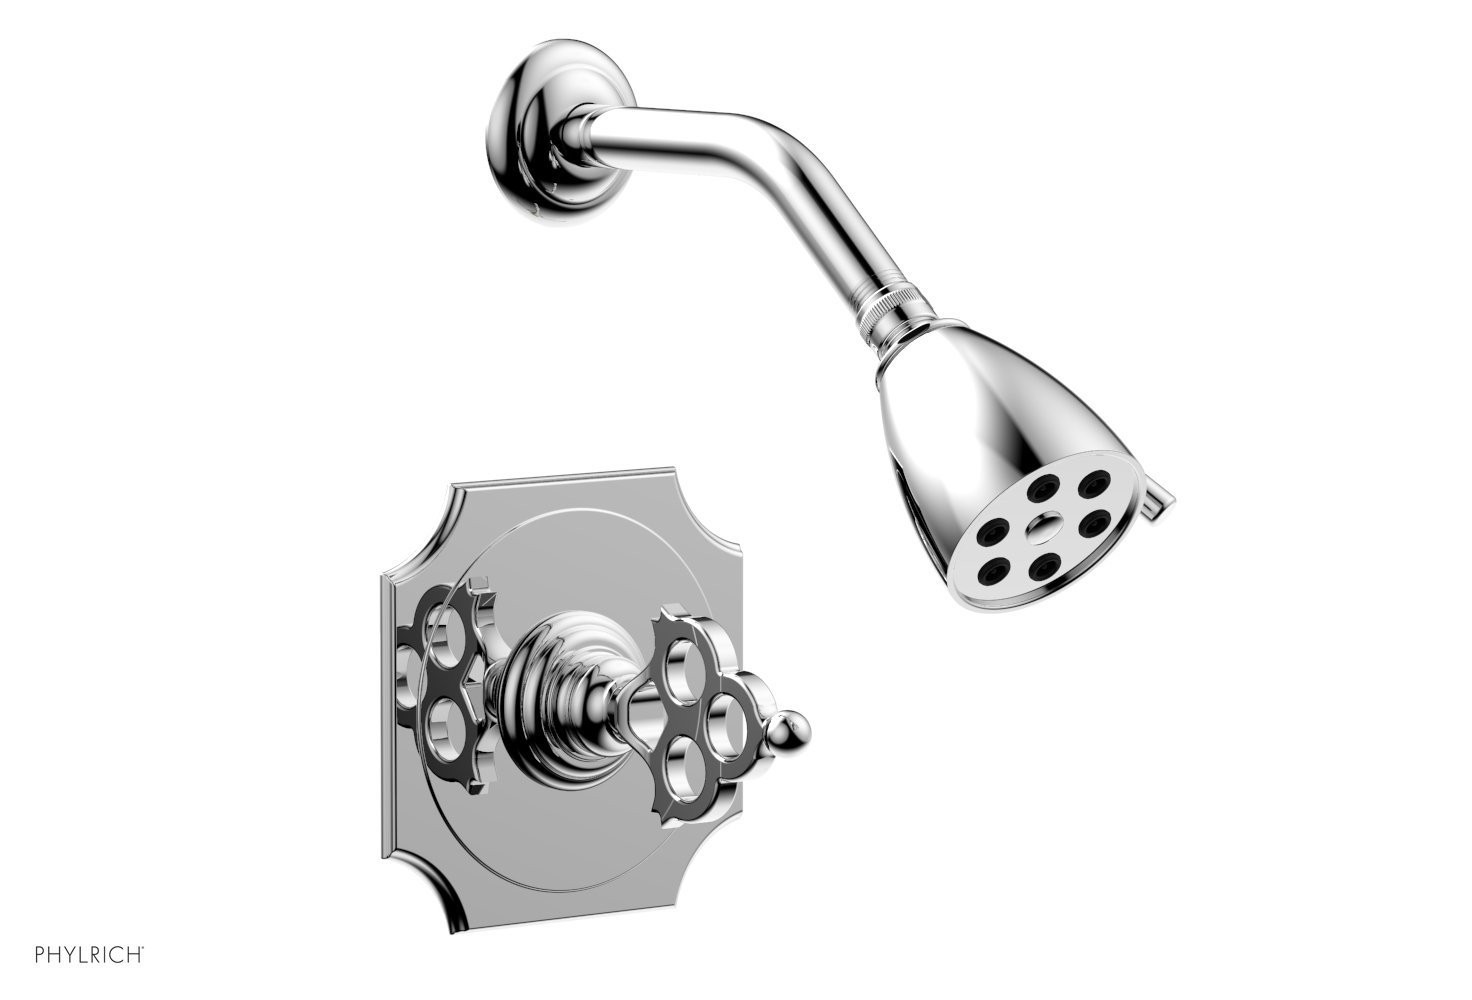 PHYLRICH 164-21 MAISON WALL MOUNT PRESSURE BALANCE SHOWER SET WITH BLADE HANDLE